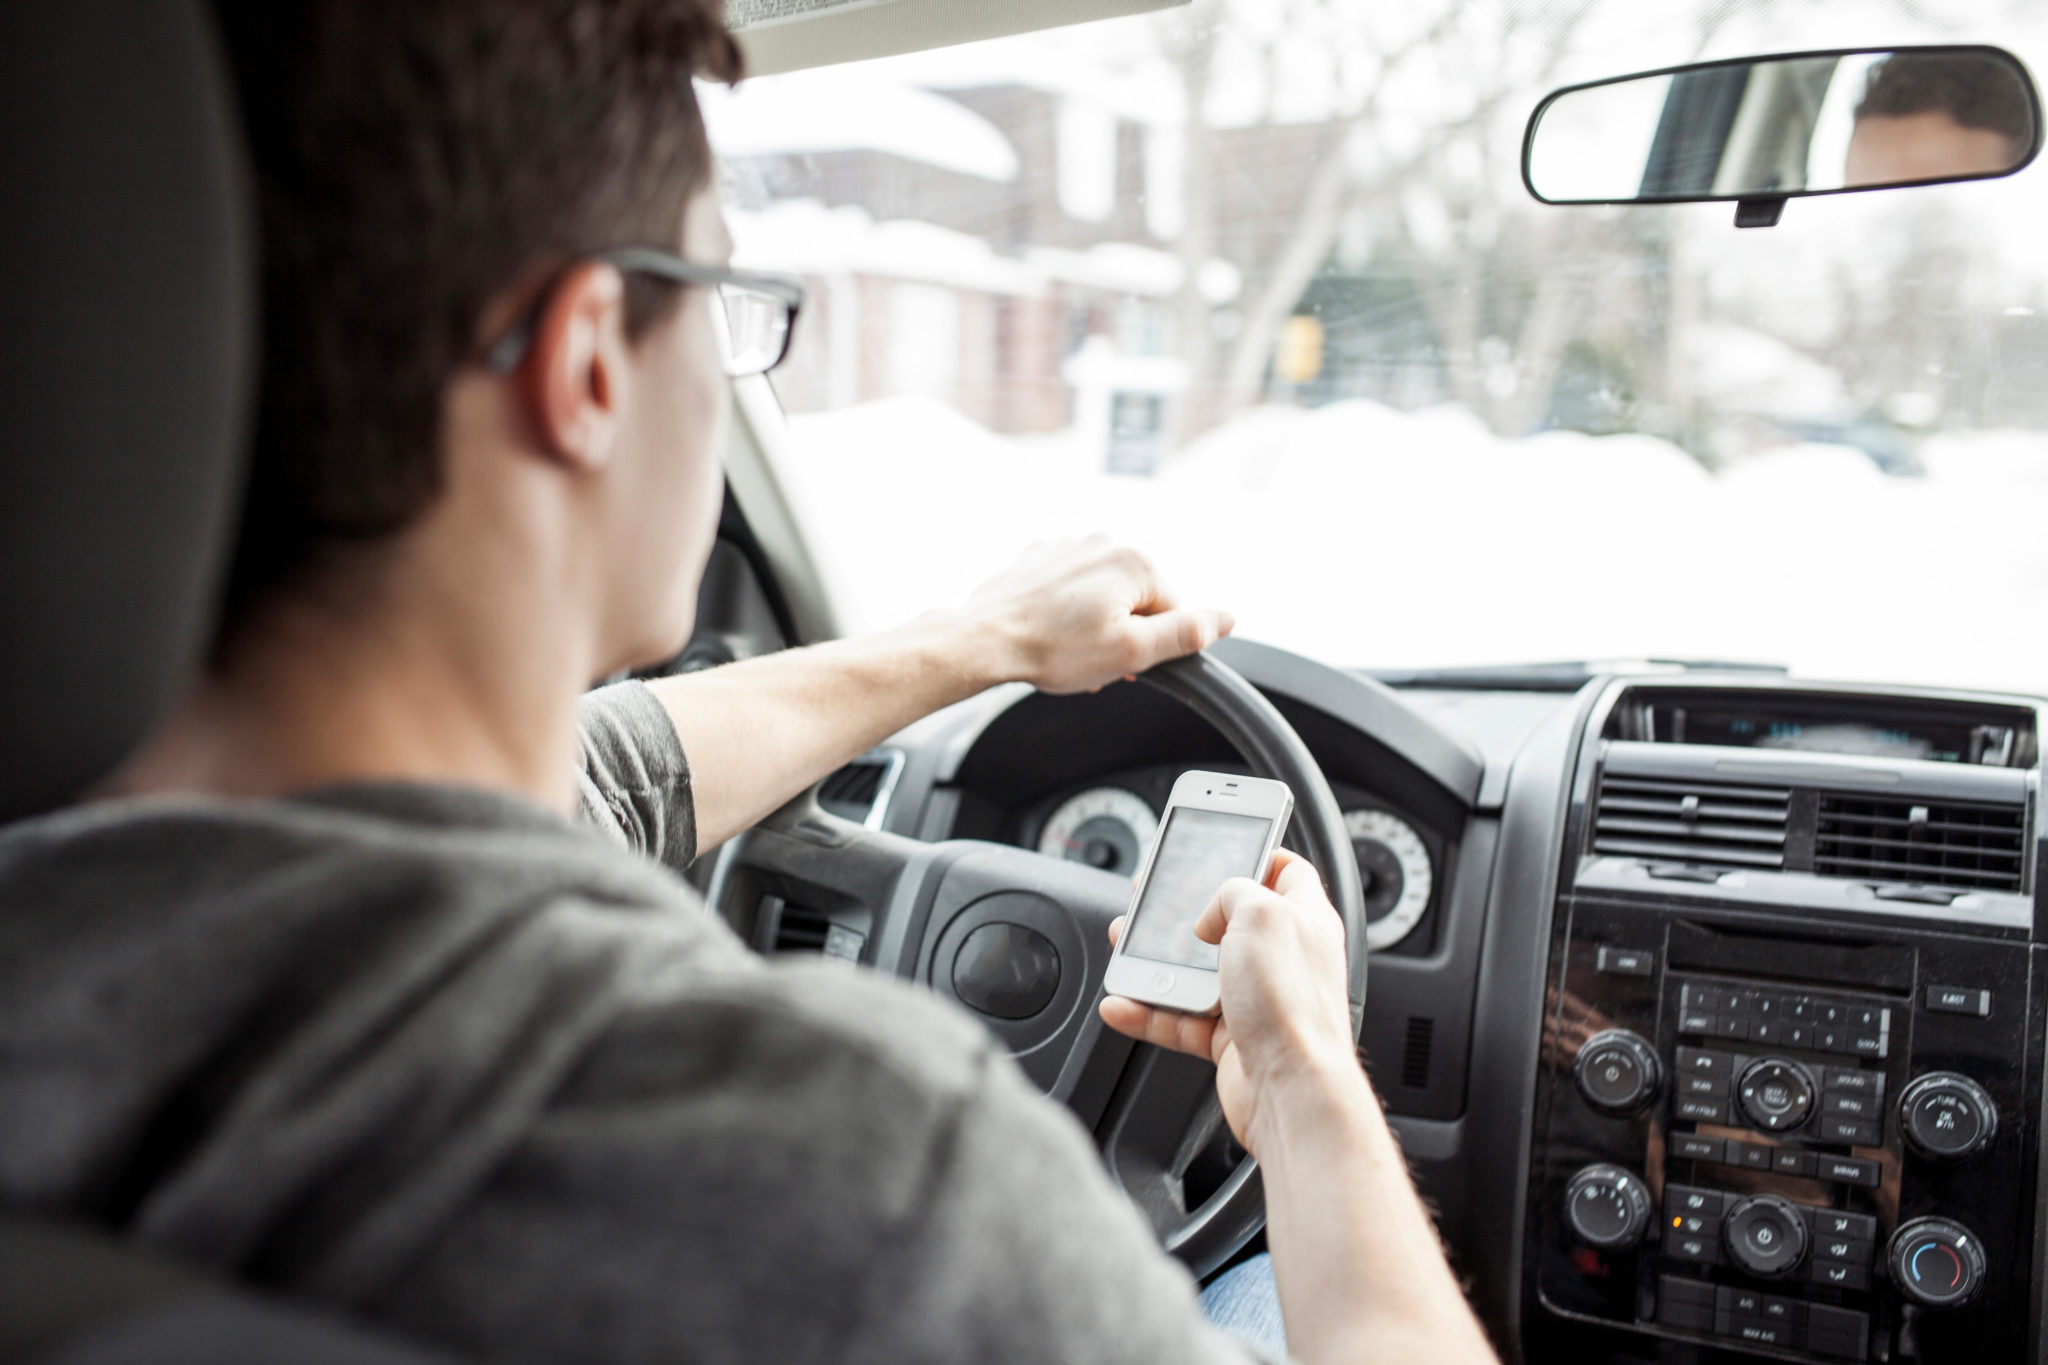 Caucasian man using cell phone and driving car.